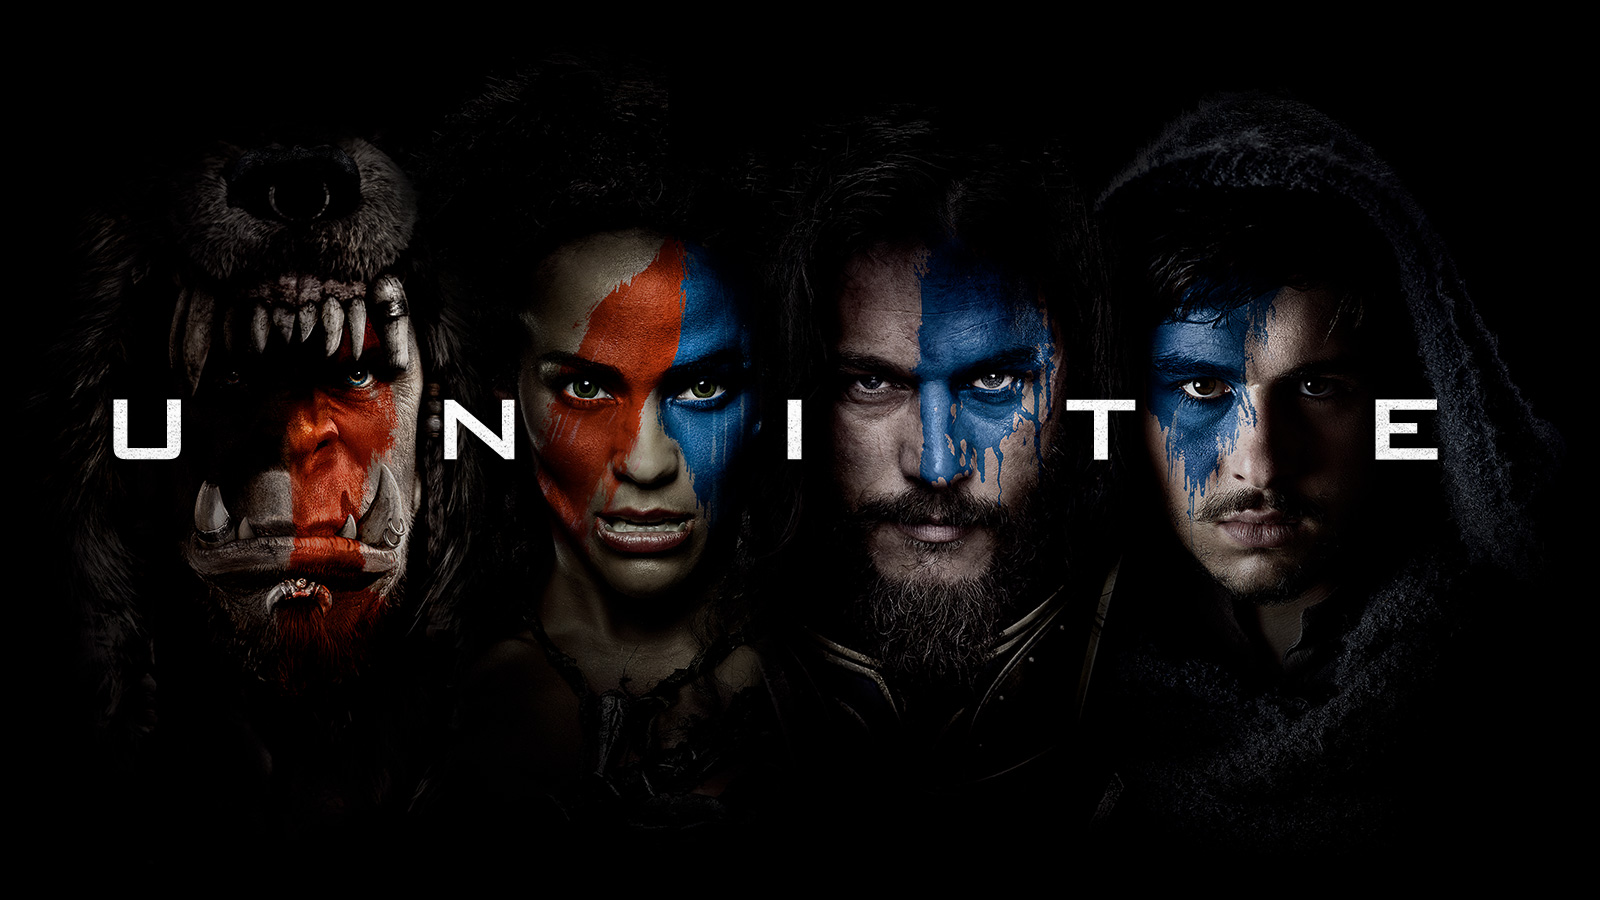 UNITE FOR THE NEW WARCRAFT TRAILER AND POSTER